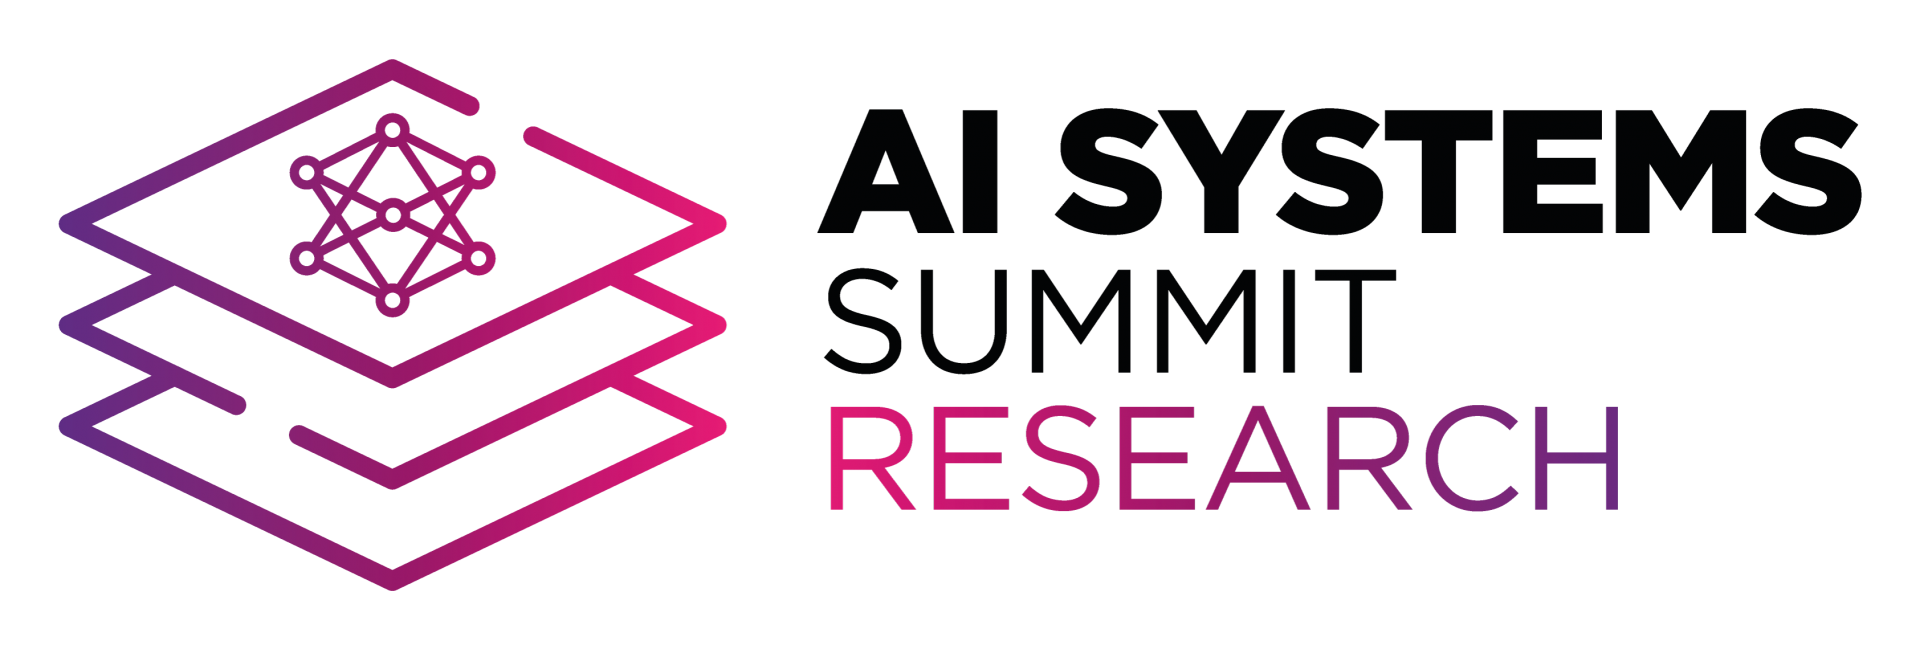 AI Systems Summit Research